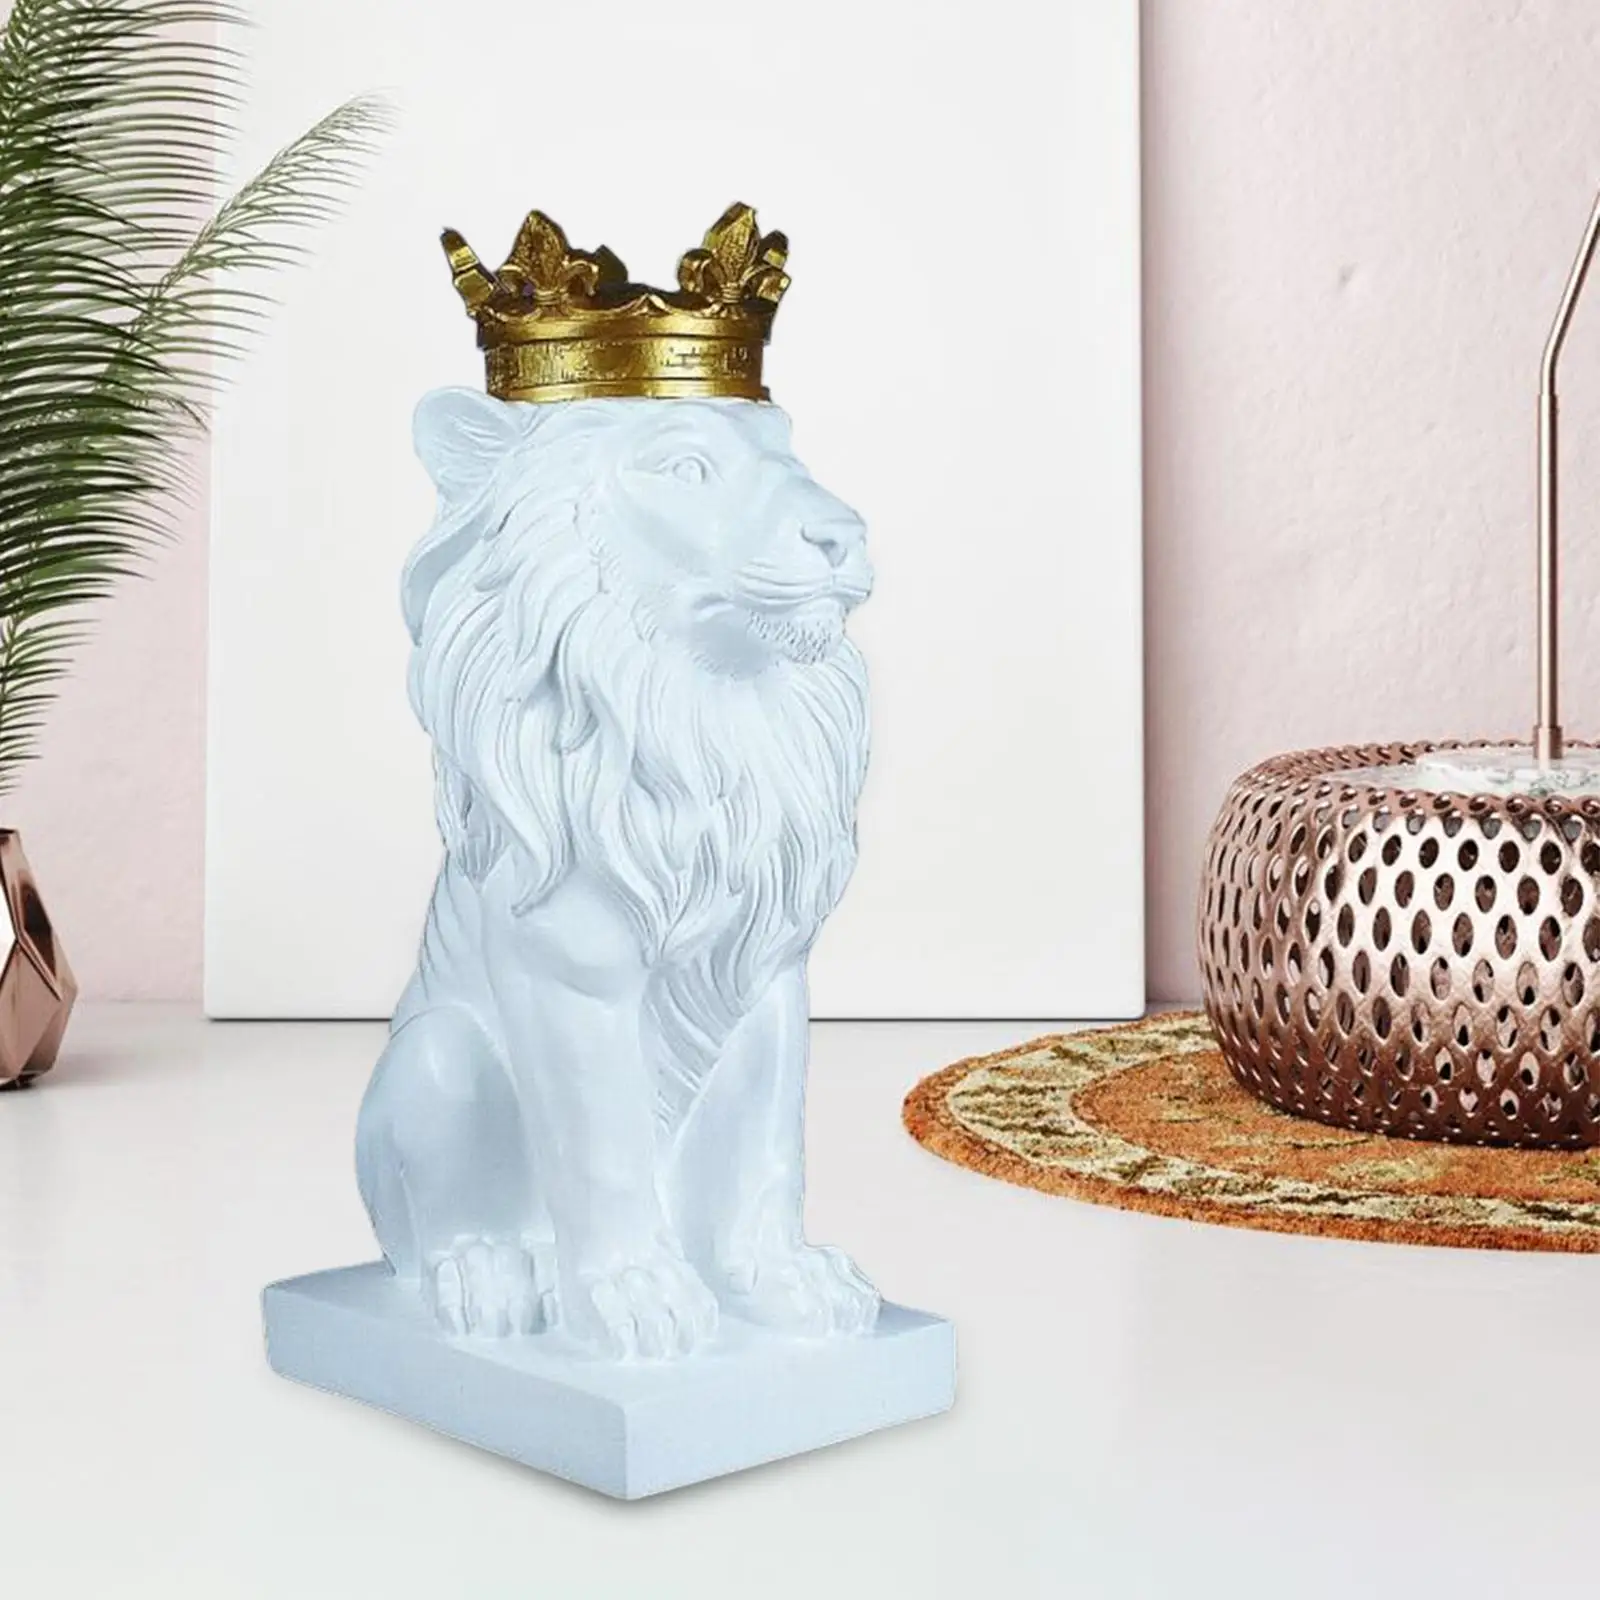 Modern 3D Lion Statue Collectible Resin Craft Ornament Table Decor Sculpture for Cabinet Bedroom Shelf Tabletop Living Room